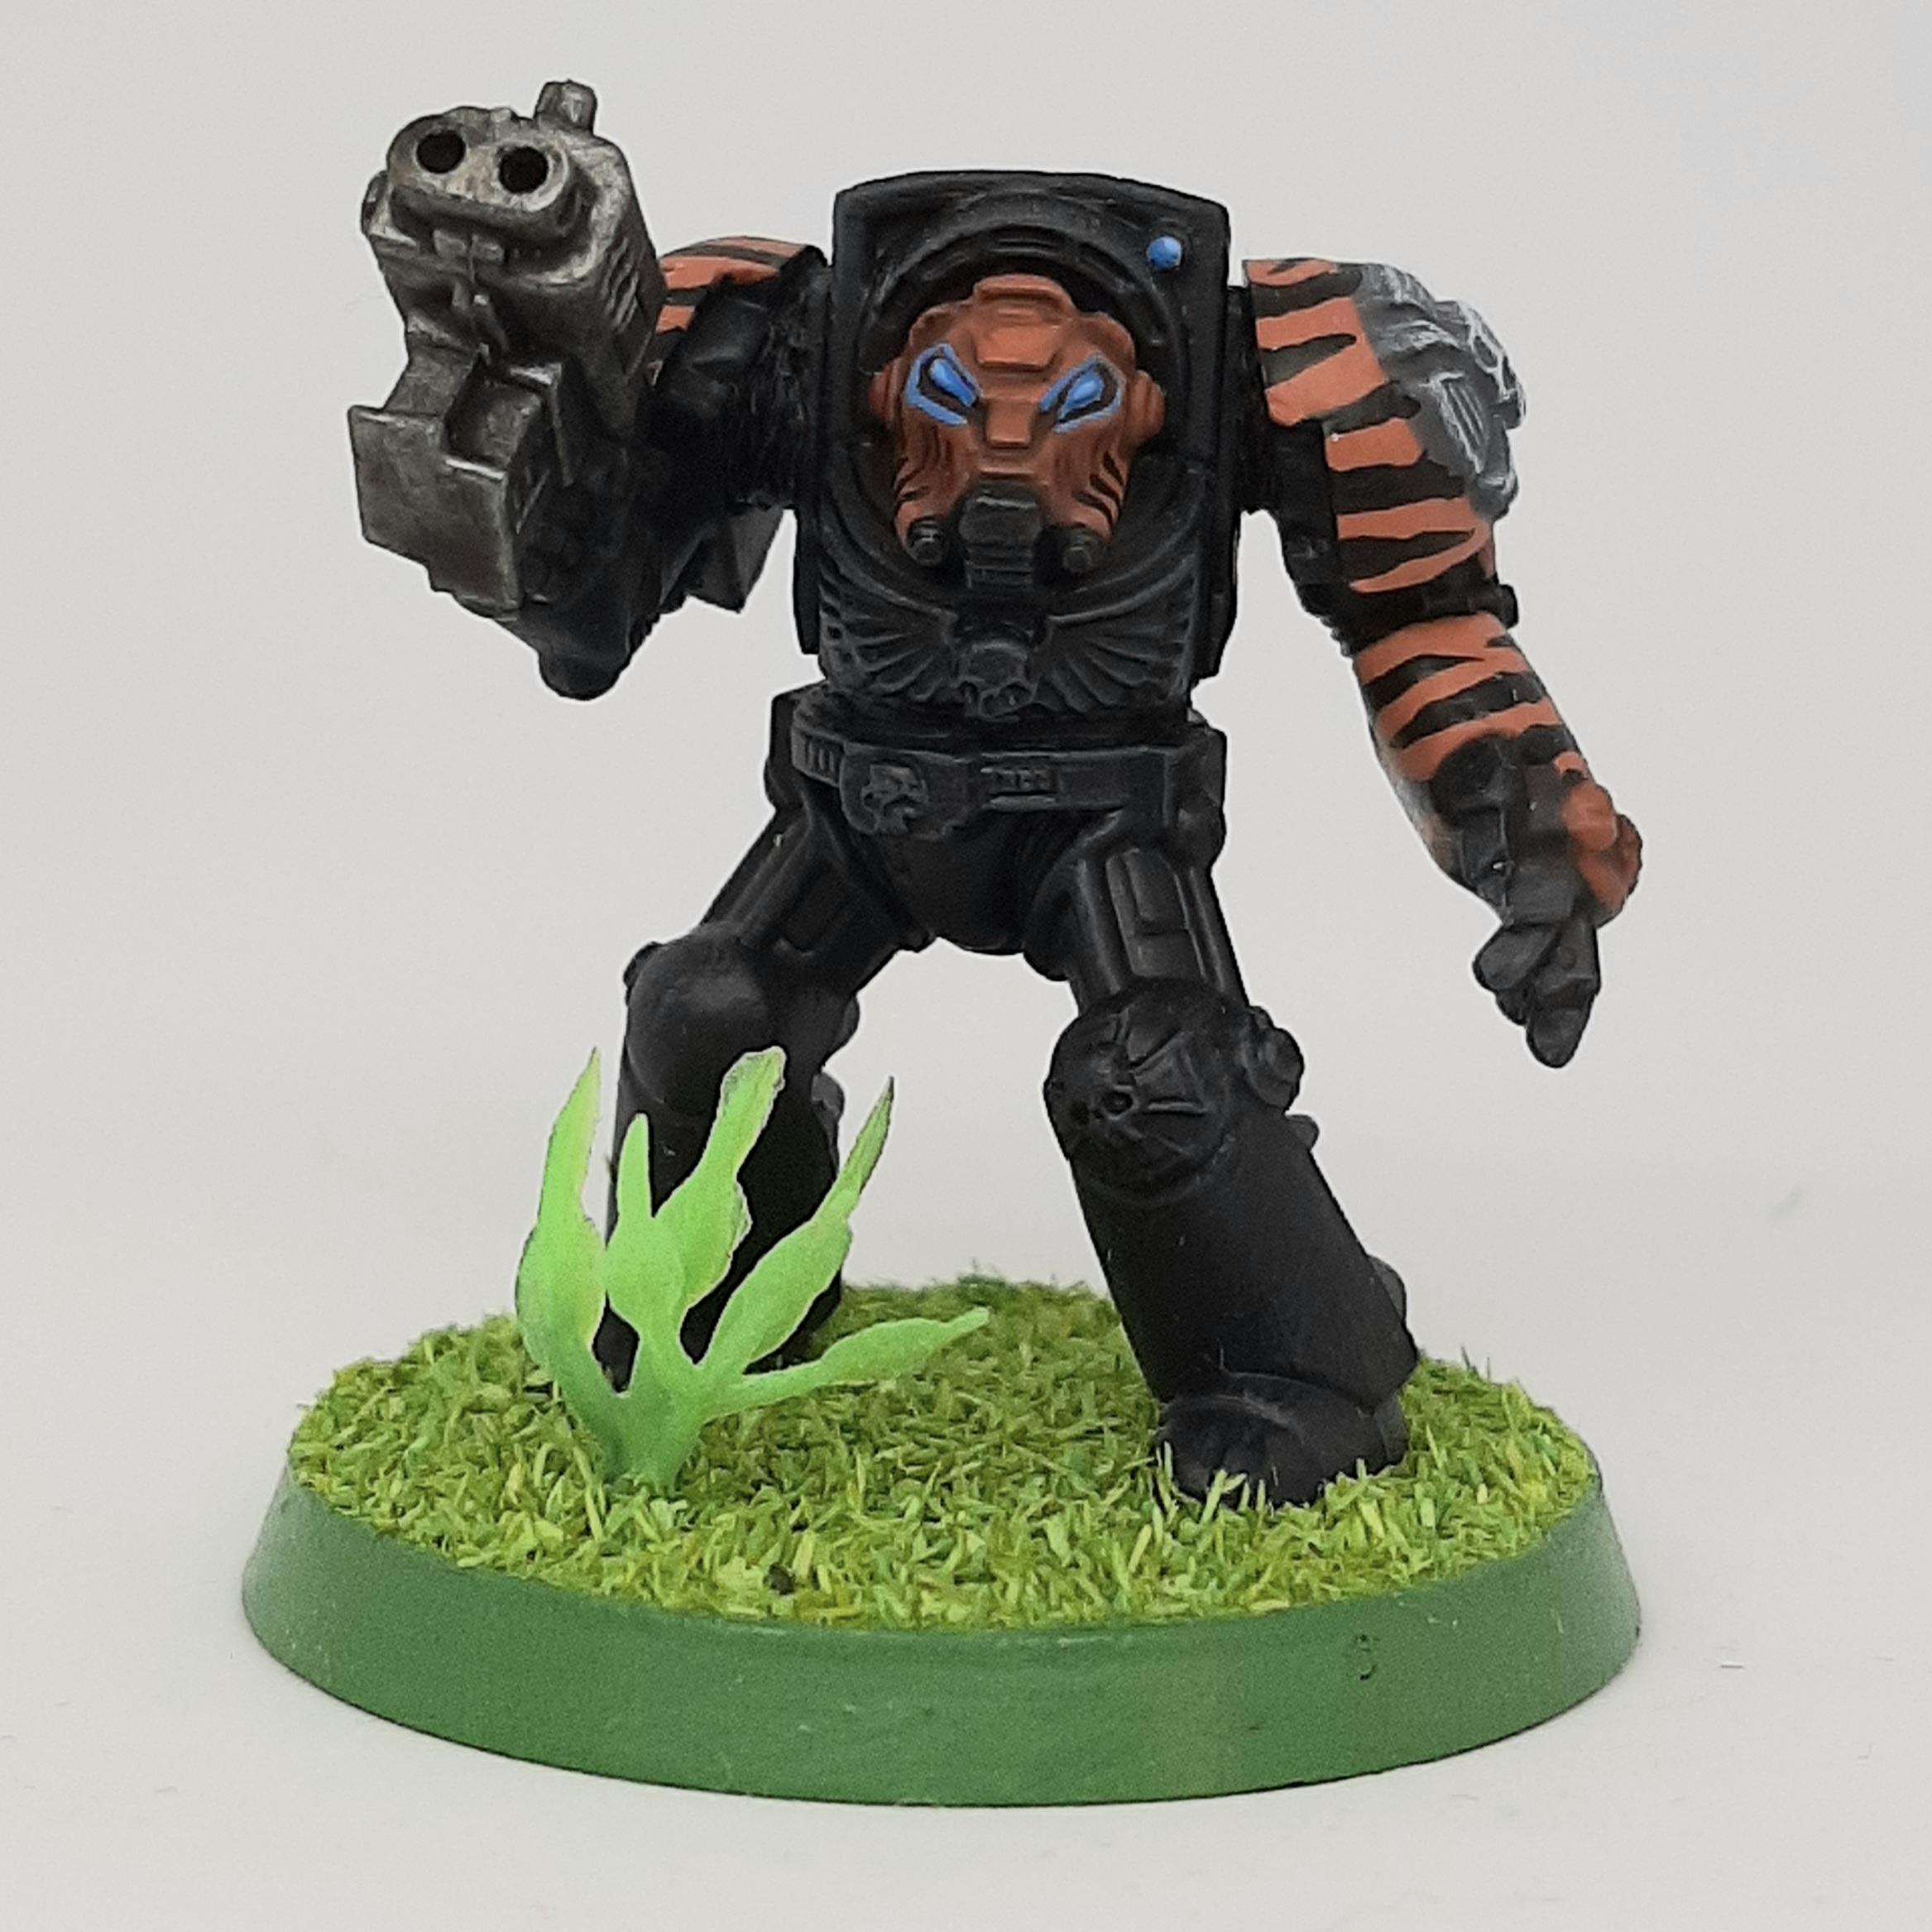 Adeptus, Astartes, Camouflage, Conversion, Custom, Fighting, Forest, India, Jungle, Kitbash, Power Fist, Saber, Space, Space Marines, Stormbolter, Terminator Armor, Tigers, Veda, Vedic